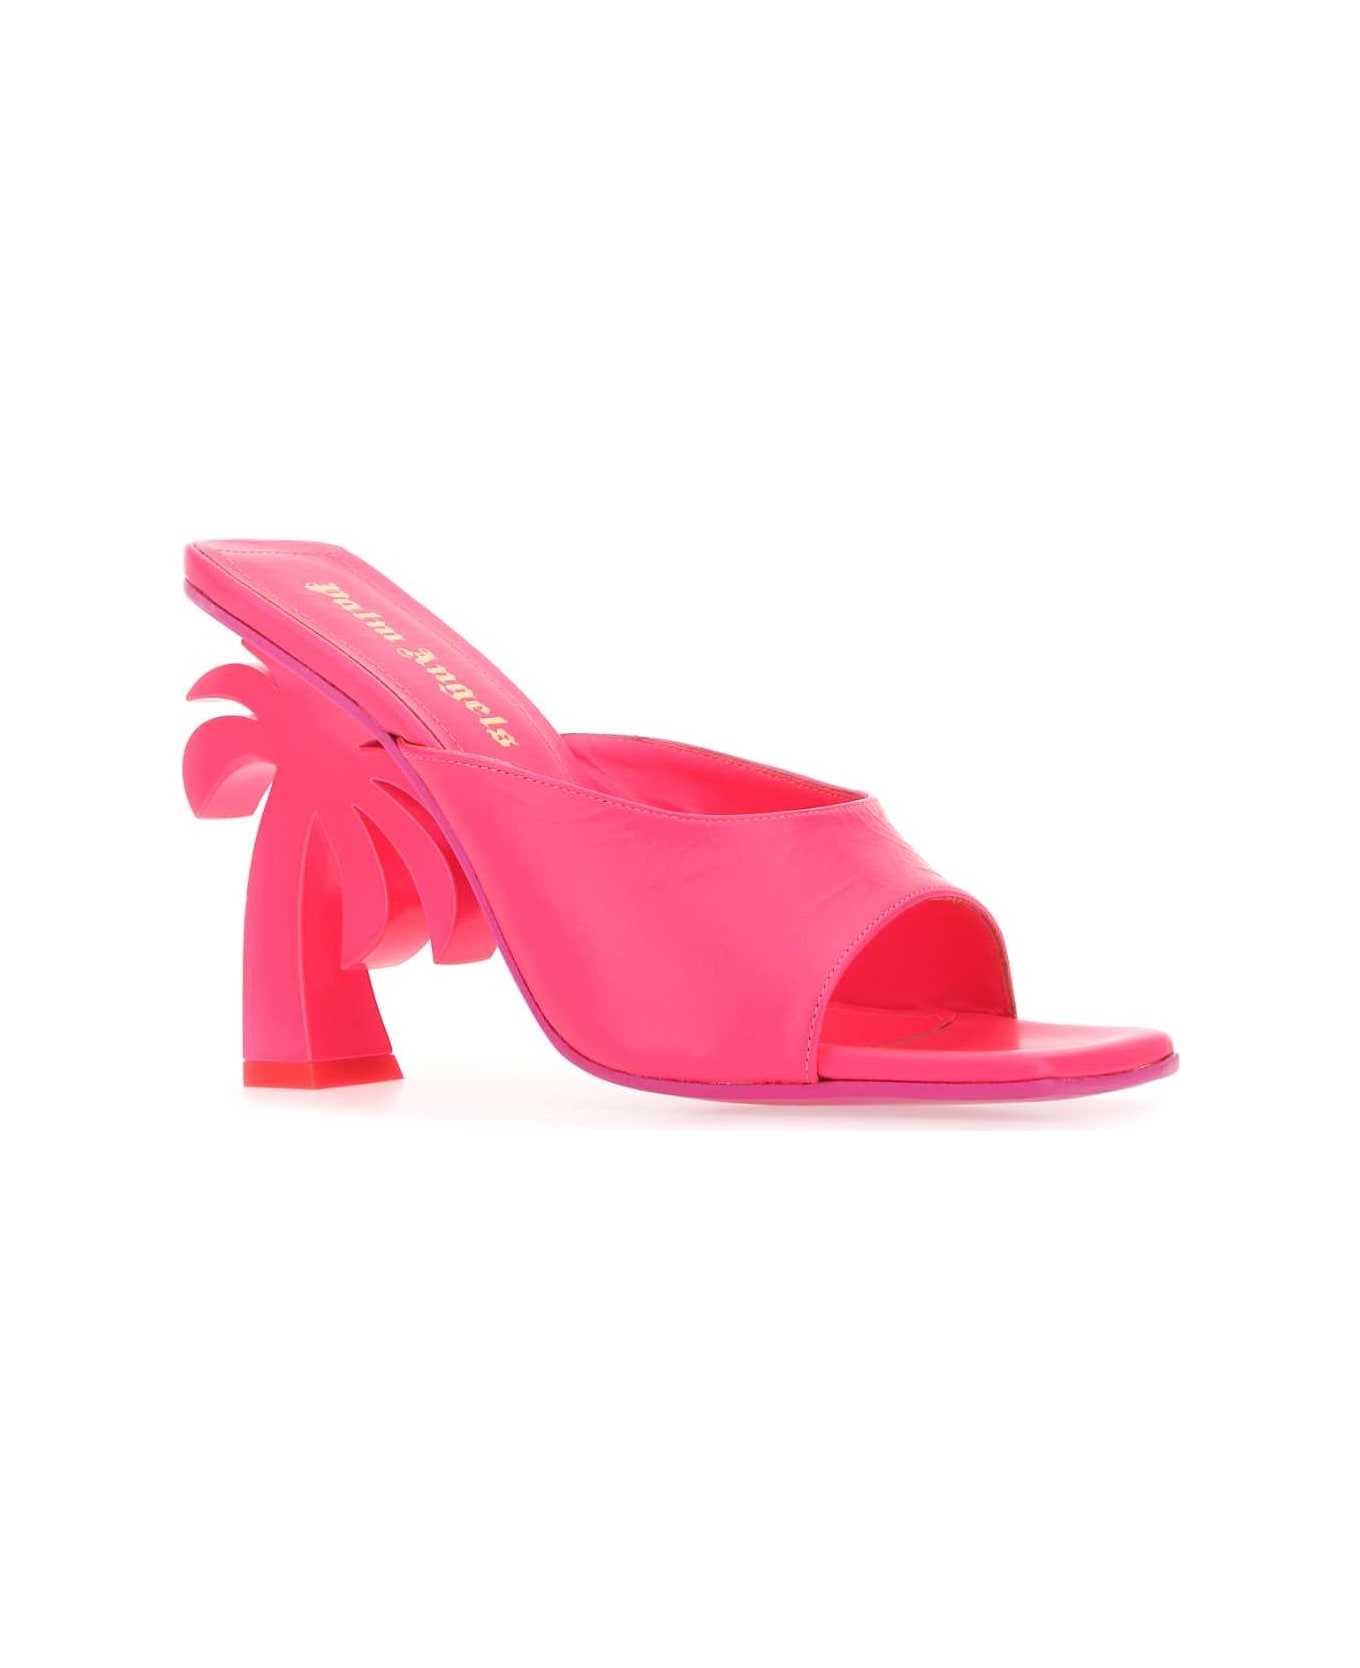 Palm Angels Fluo Pink Leather Mules - 3200